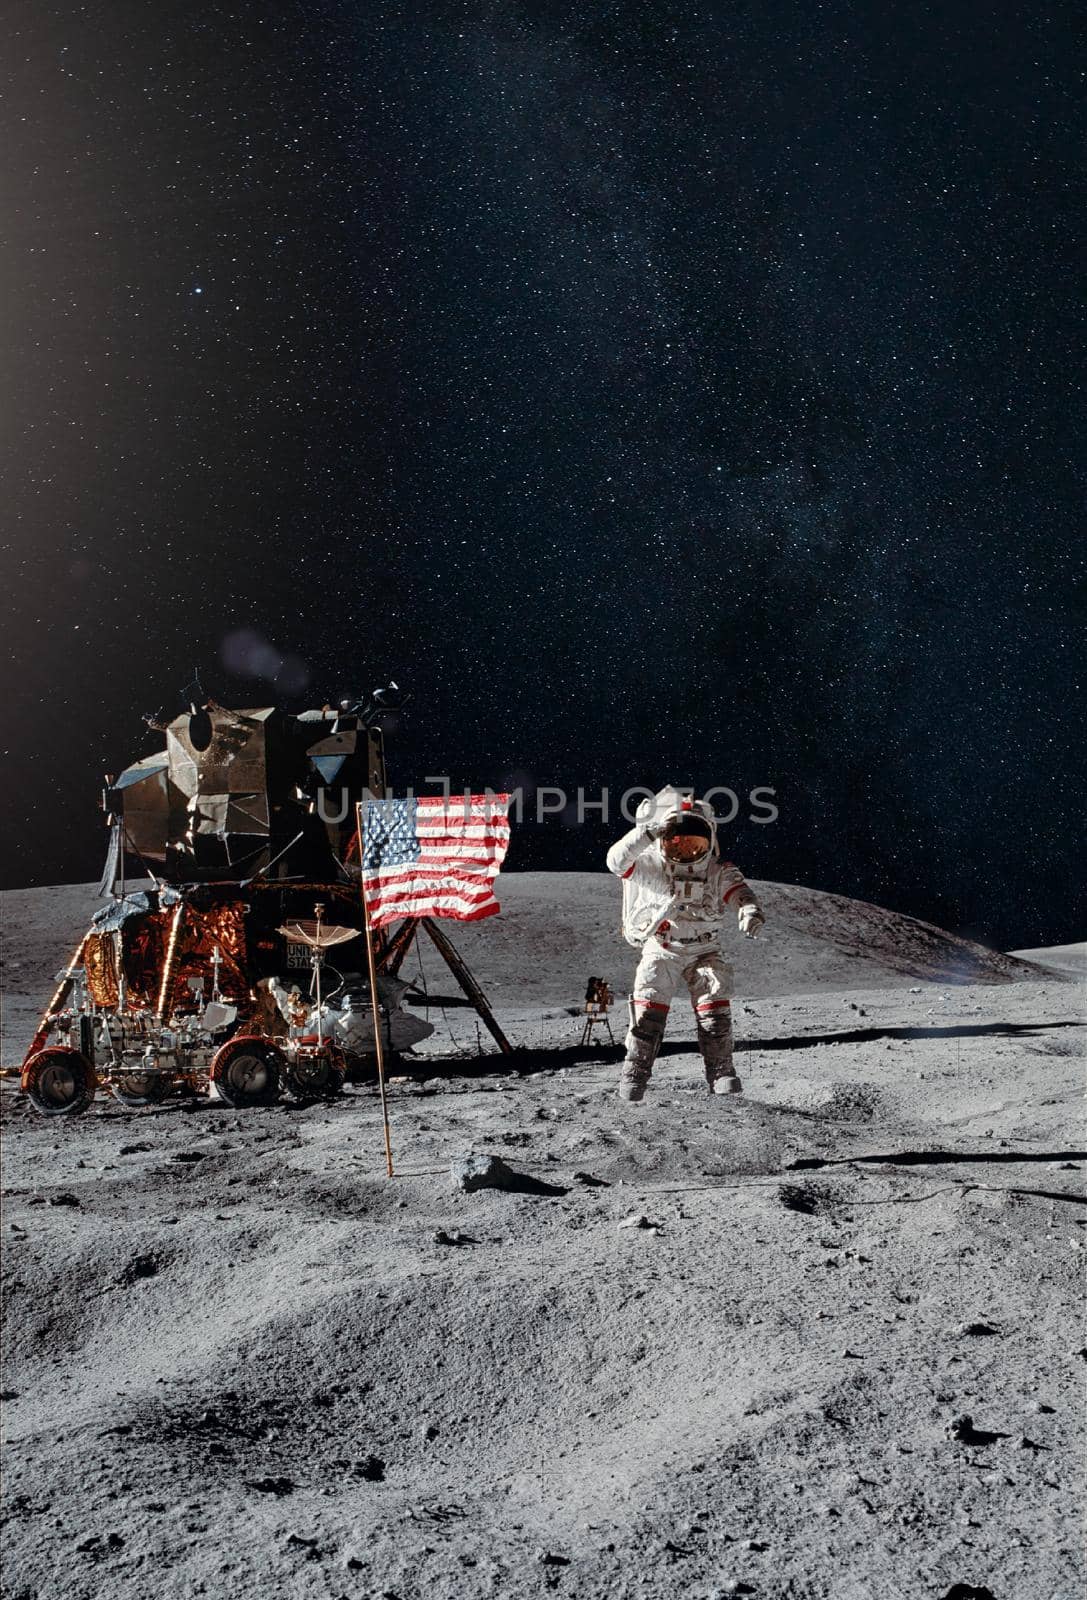 Man on the moon. Astronaut on lunar (moon) landing mission. Elements of this image furnished by NASA.